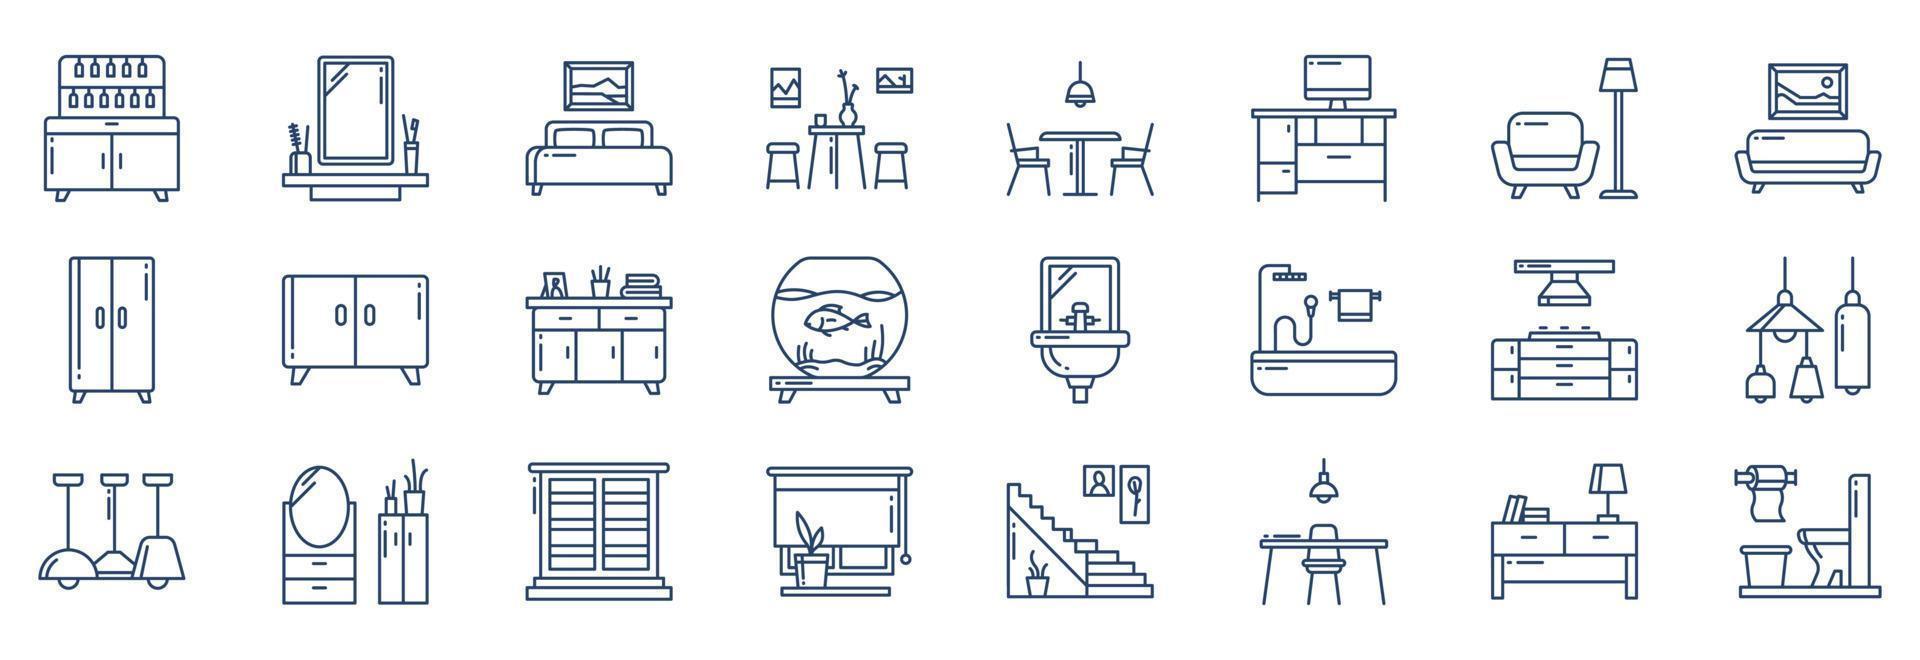 Collection of icons related to Interior and home decor, including icons like Bar, Bed, Coffee table, Sofa and more. vector illustrations, Pixel Perfect set